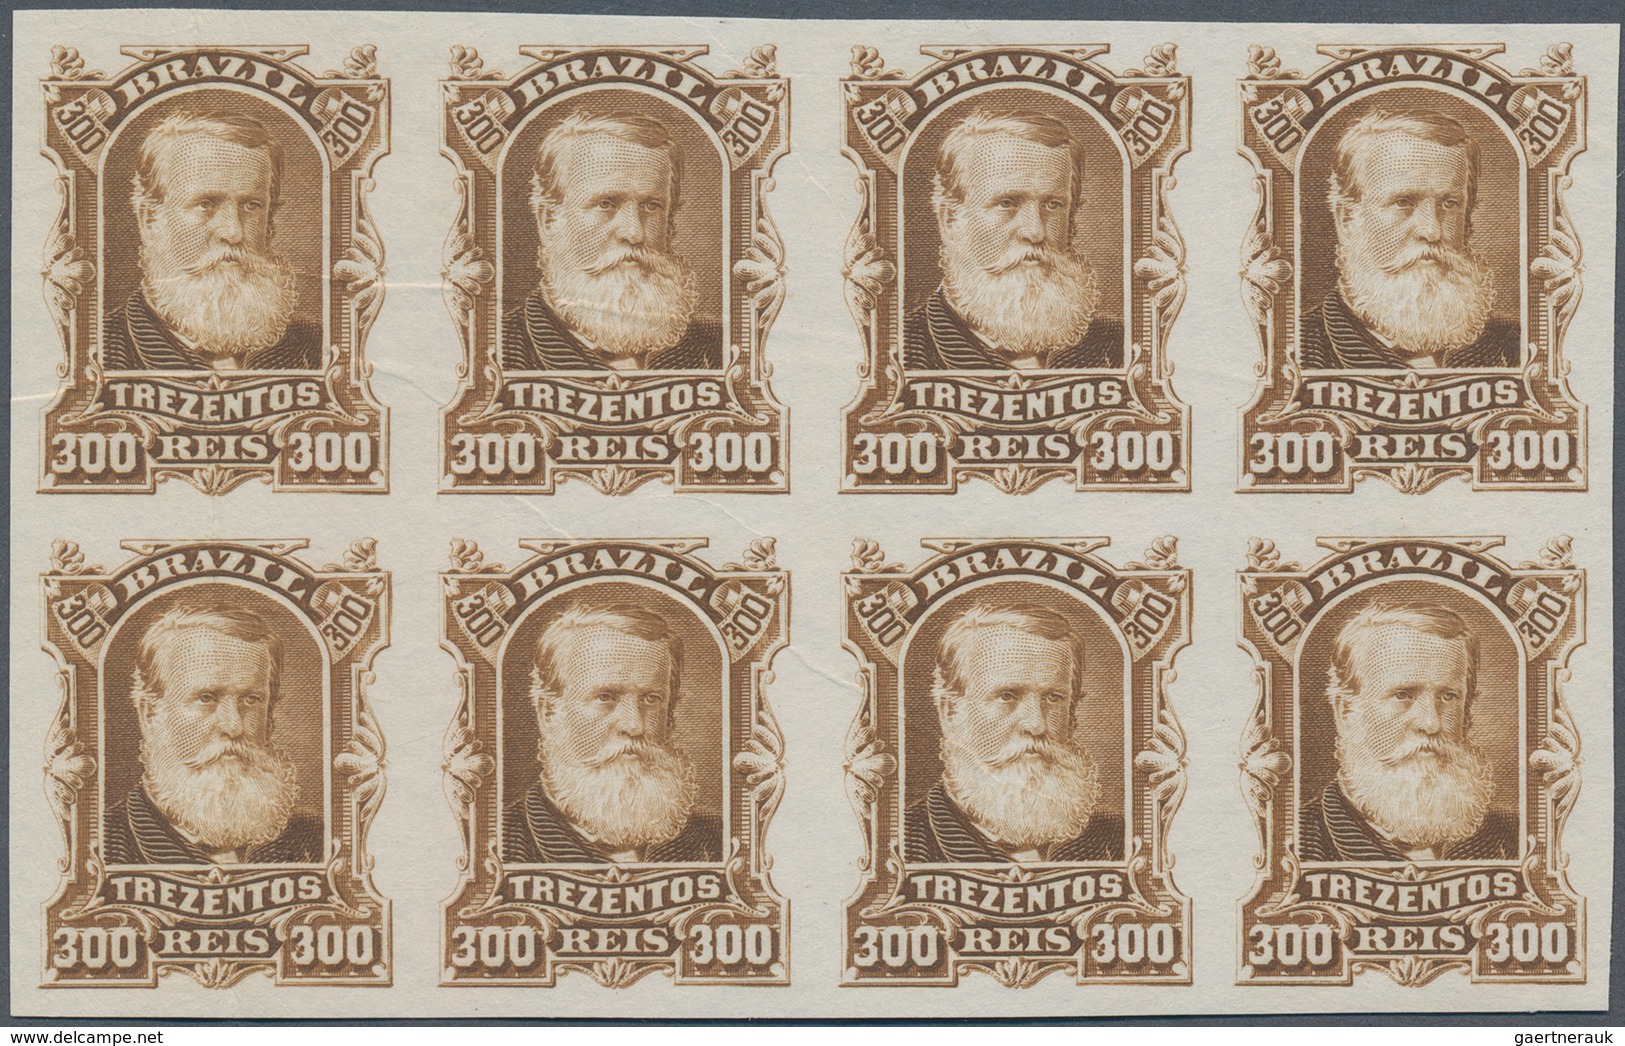 Brasilien: 1878-79, 300 R. Bister Imperf Block Of Eight On White Wove Paper, Vertical Crease At Left - Gebraucht